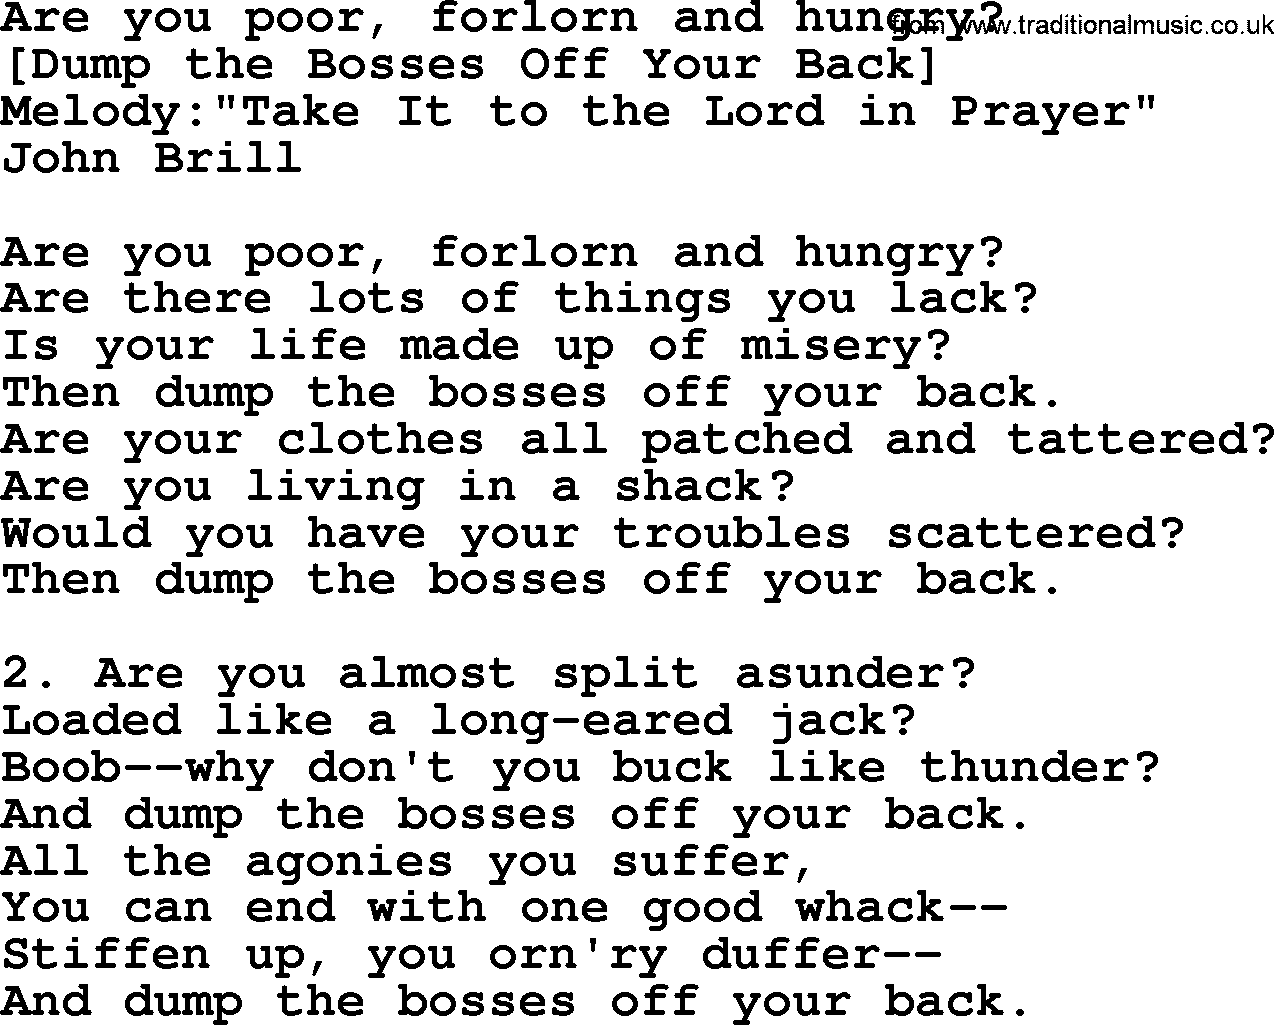 Old American Song: Are You Poor, Forlorn And Hungry, lyrics